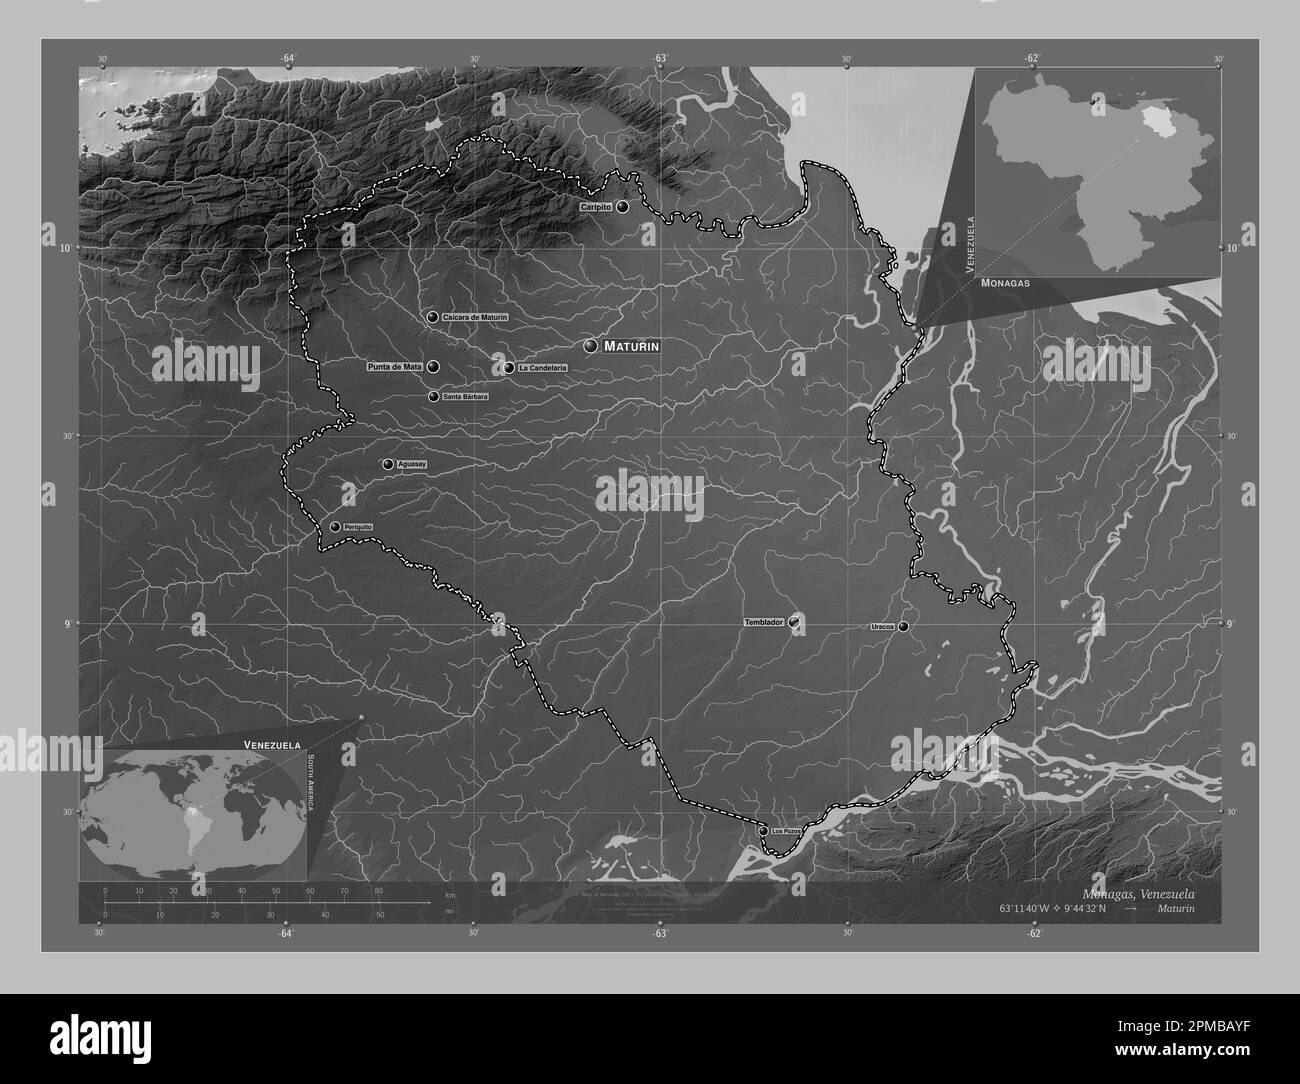 Monagas, state of Venezuela. Grayscale elevation map with lakes and rivers. Locations and names of major cities of the region. Corner auxiliary locati Stock Photo